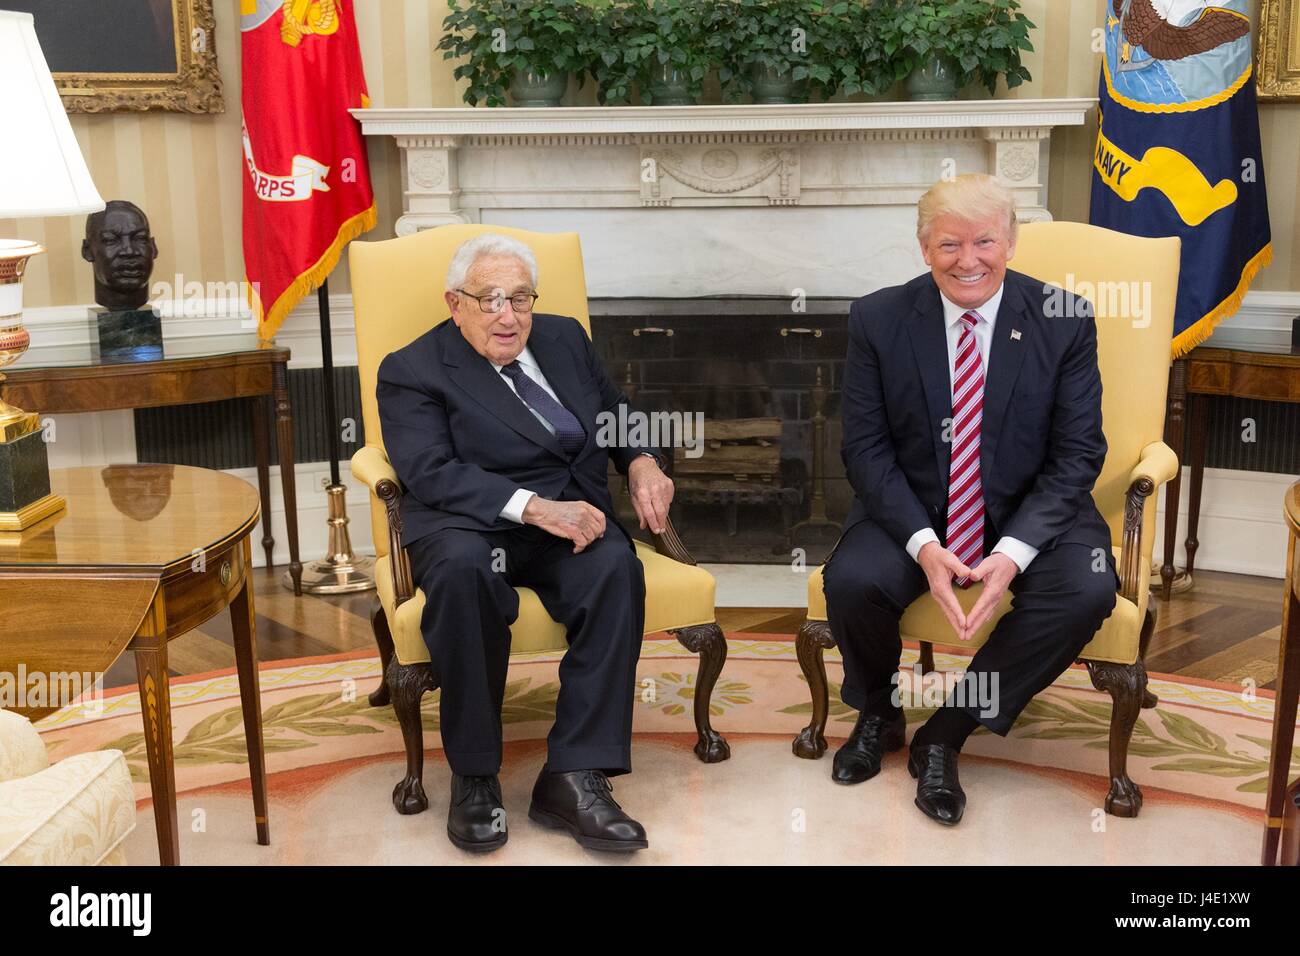 U.S. President Donald Trump meets with former Secretary of State Henry Kissinger in the Oval Office of the White House May 10, 2017 in Washington, DC. Stock Photo